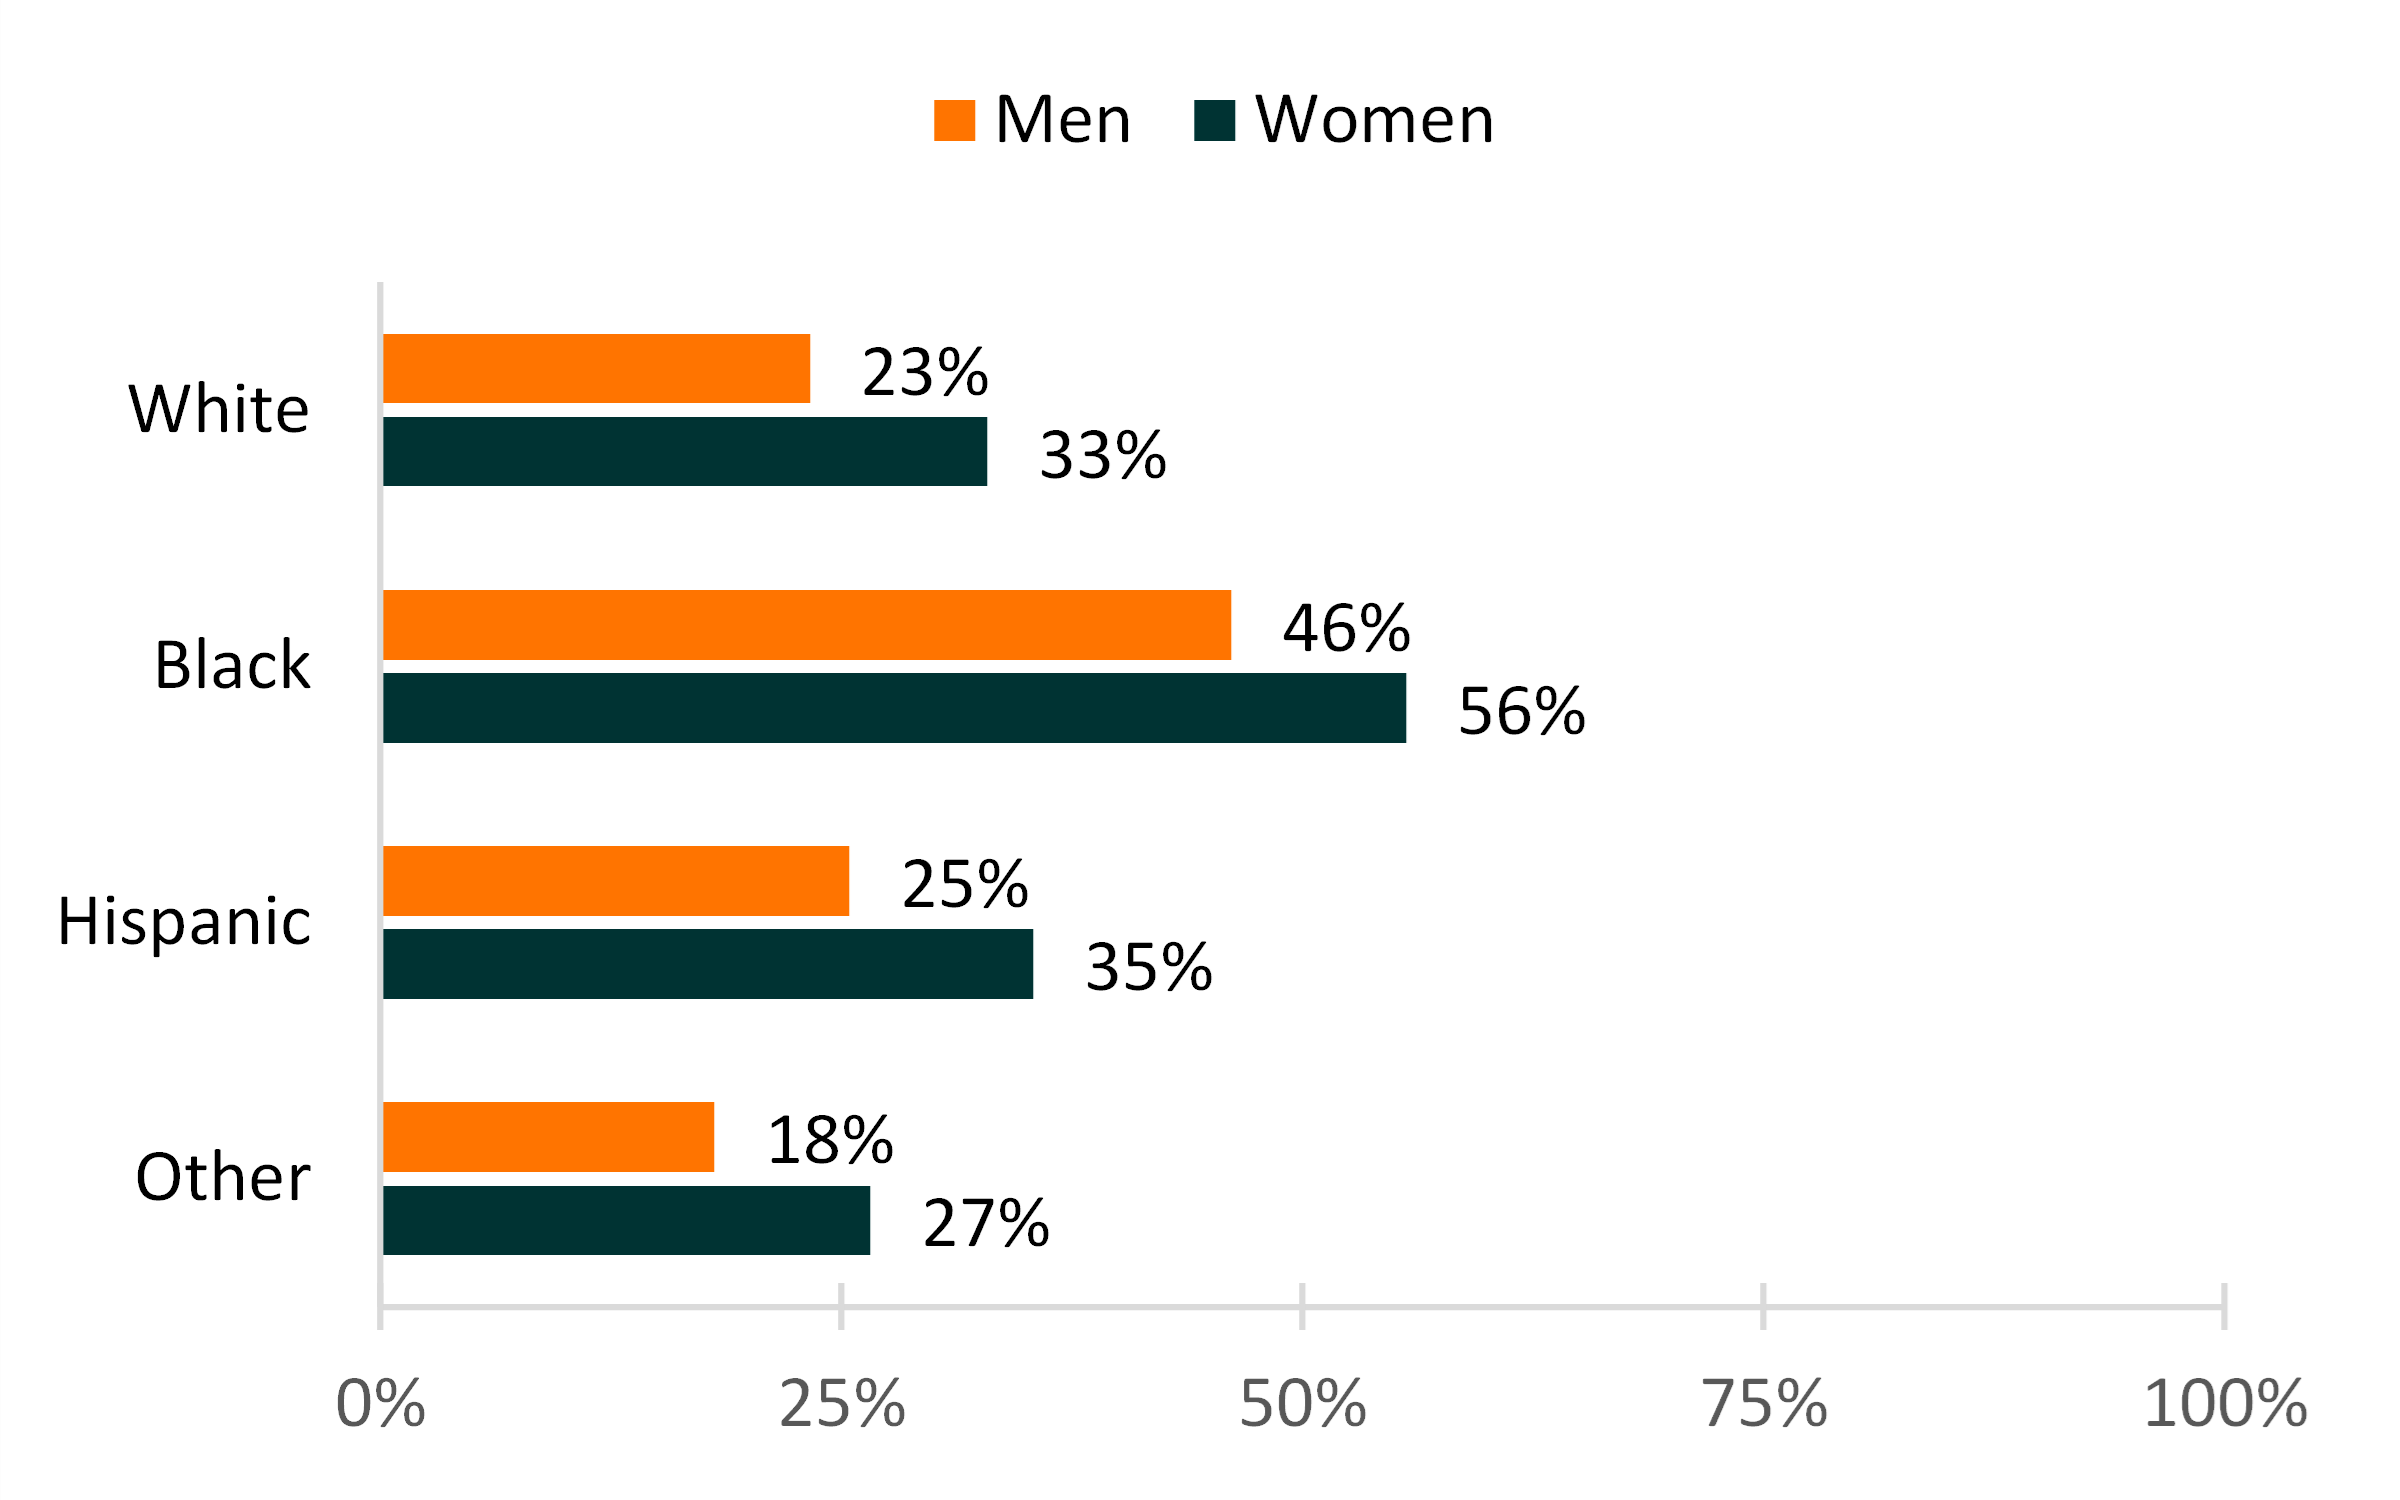 black-and-orange-bar-graph-showing-stepfamily-share-of-unions-by-race-ethnicity-and-gender